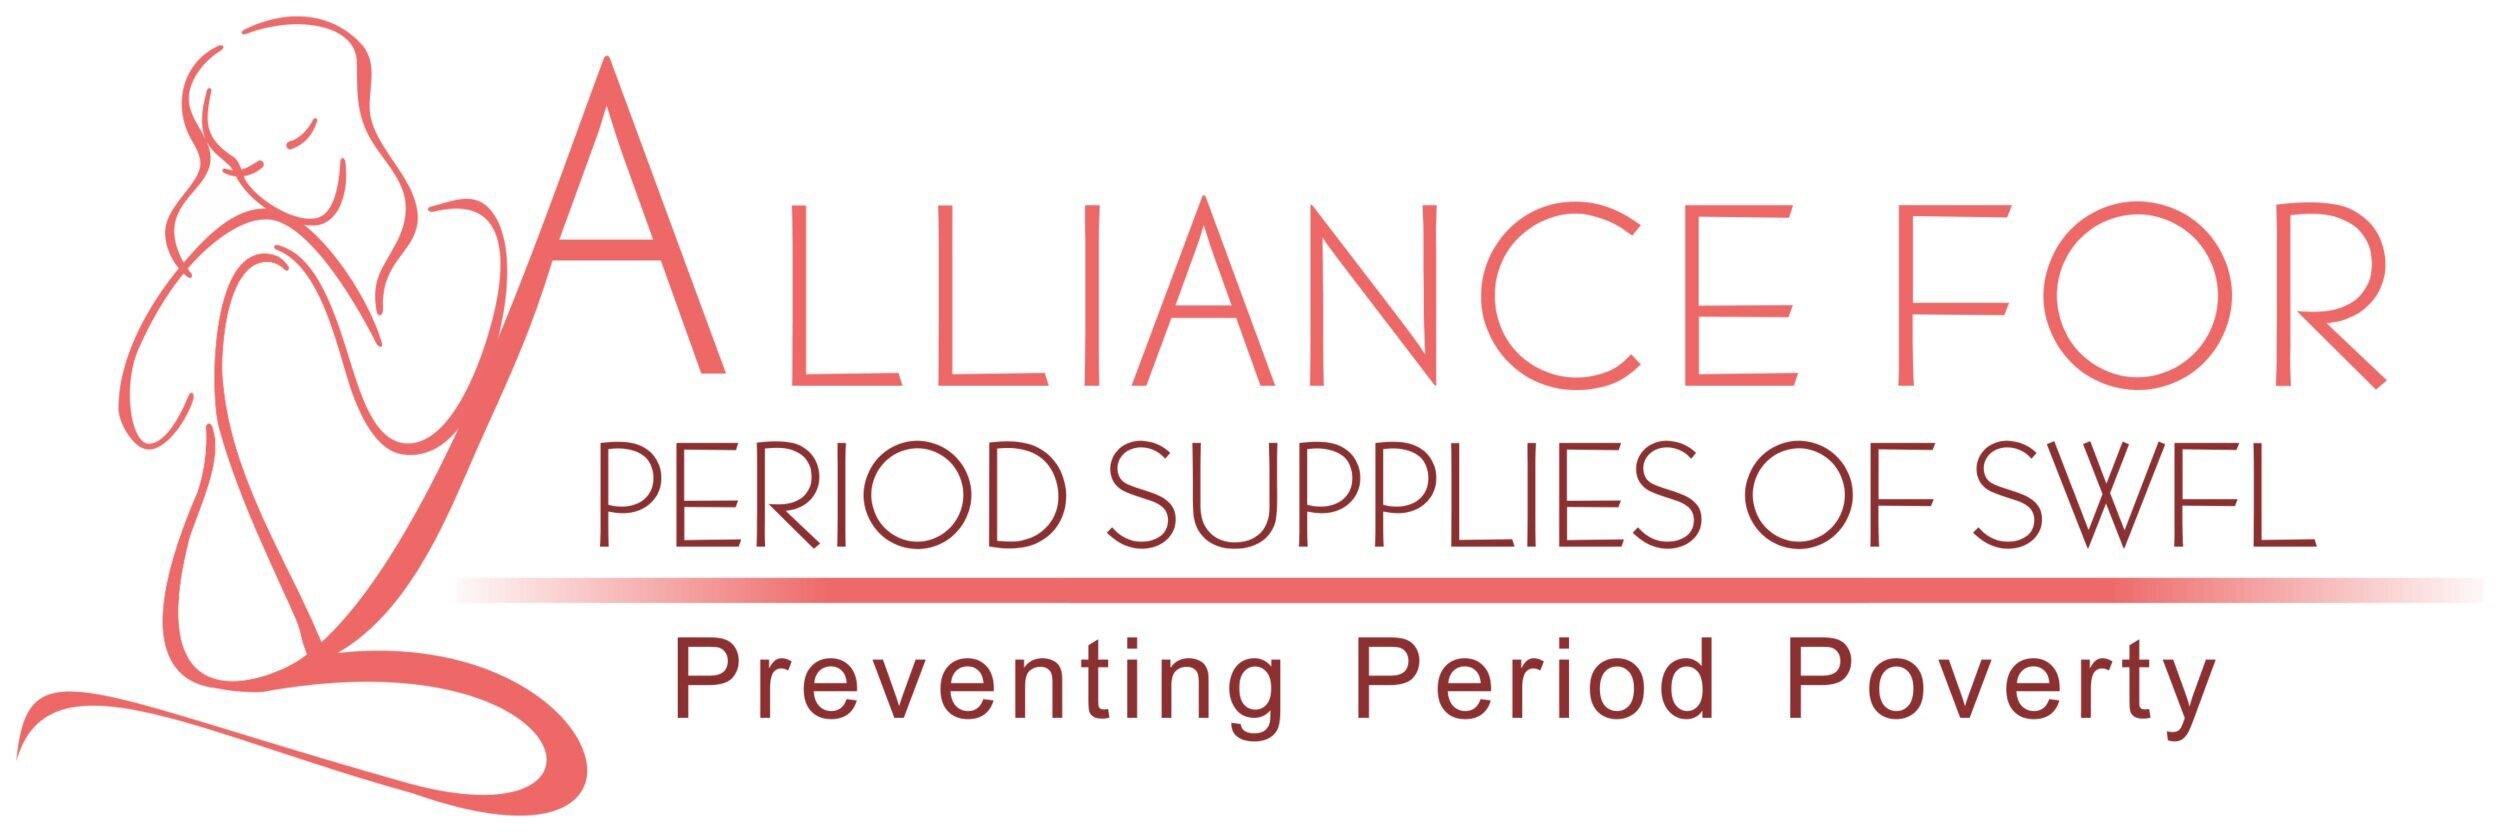 Alliance for Period Supplies of SWFL